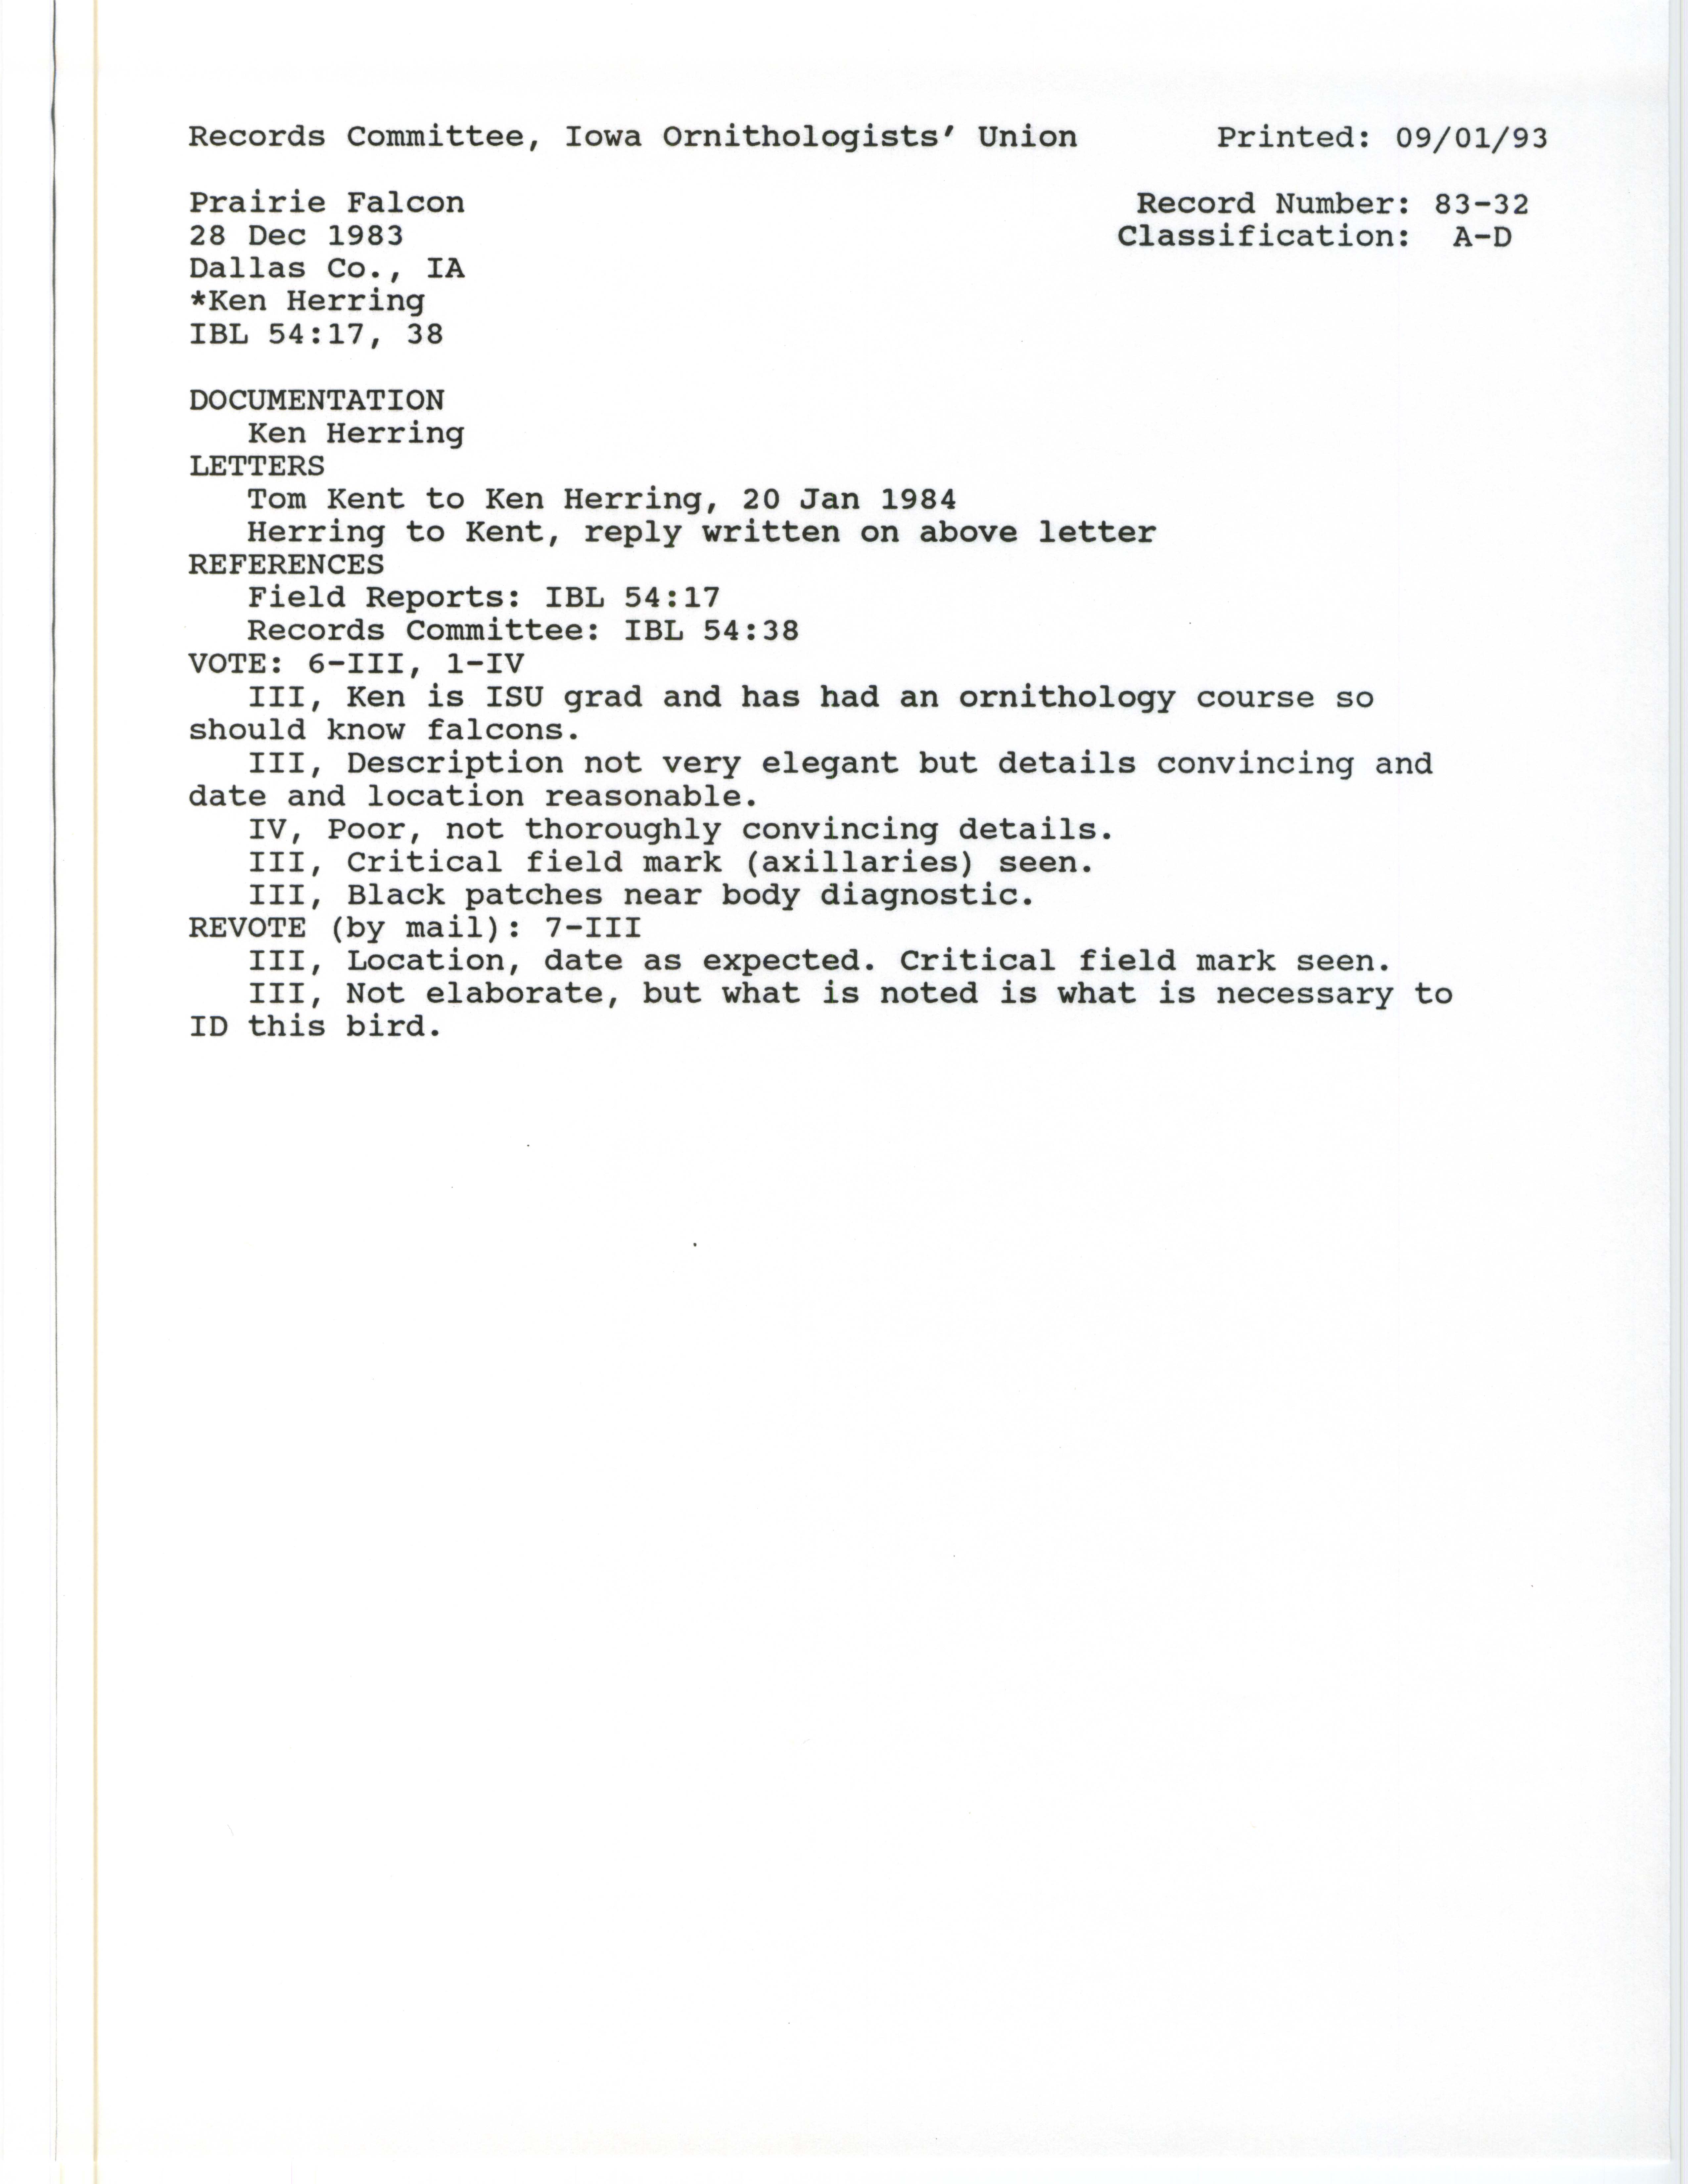 Records Committee review for rare bird sighting of Prairie Falcon at Linn Township in Dallas County, 1983